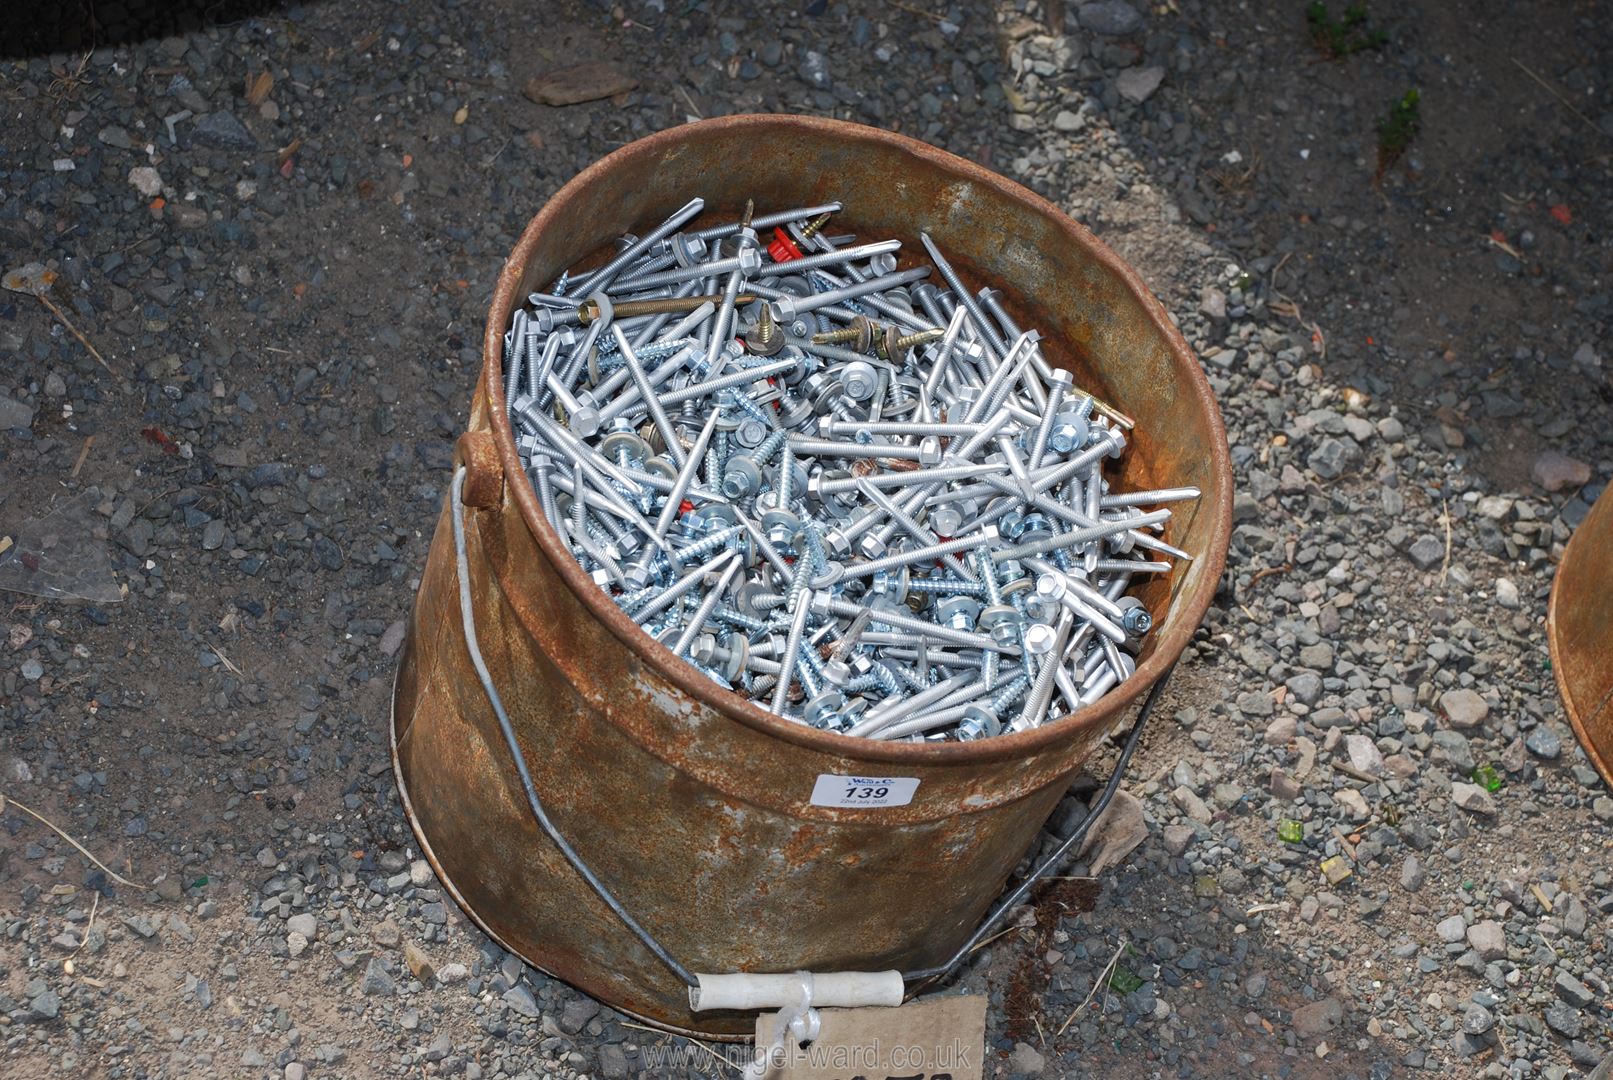 A bucket of tec screws; 2 1/2" and 1 1/2".